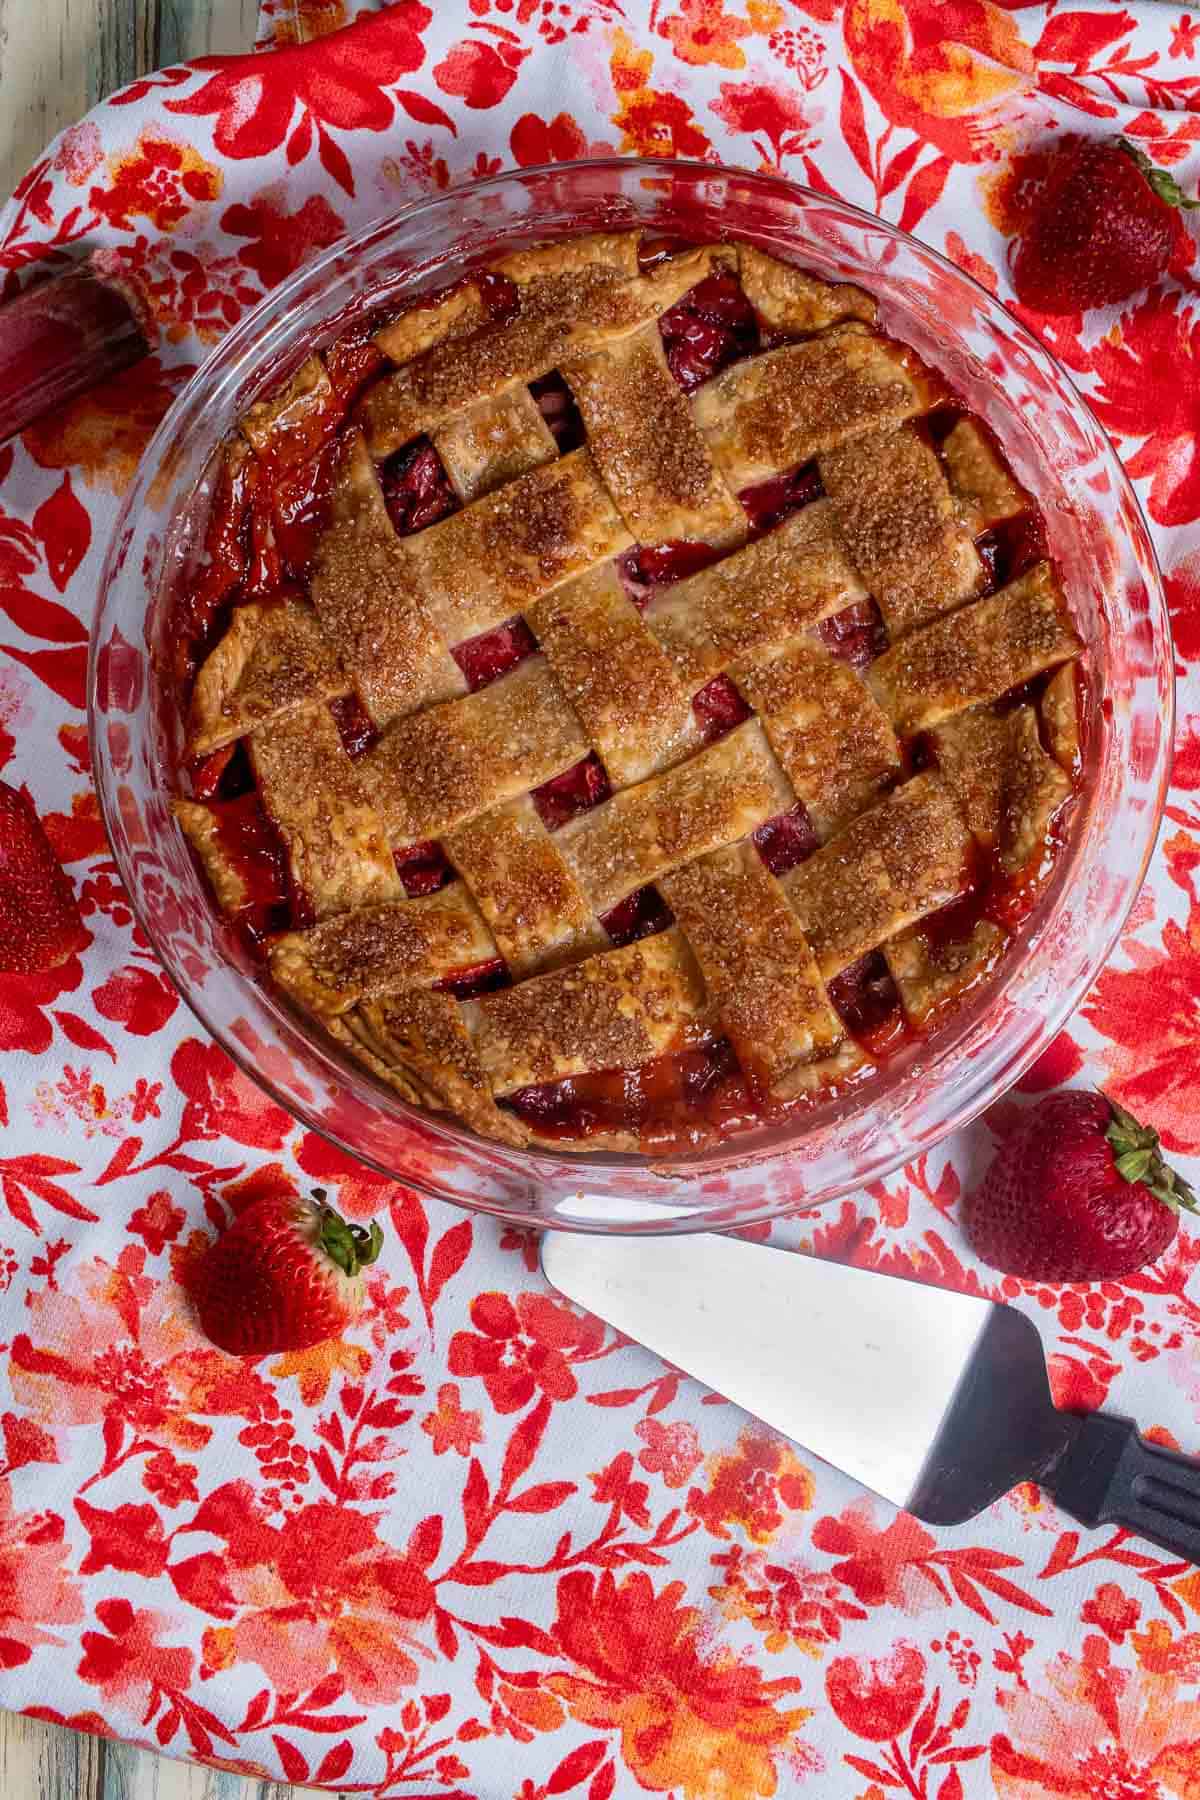 Overhead view of strawberry rhubarb lattice pie on a red and white floral cloth.